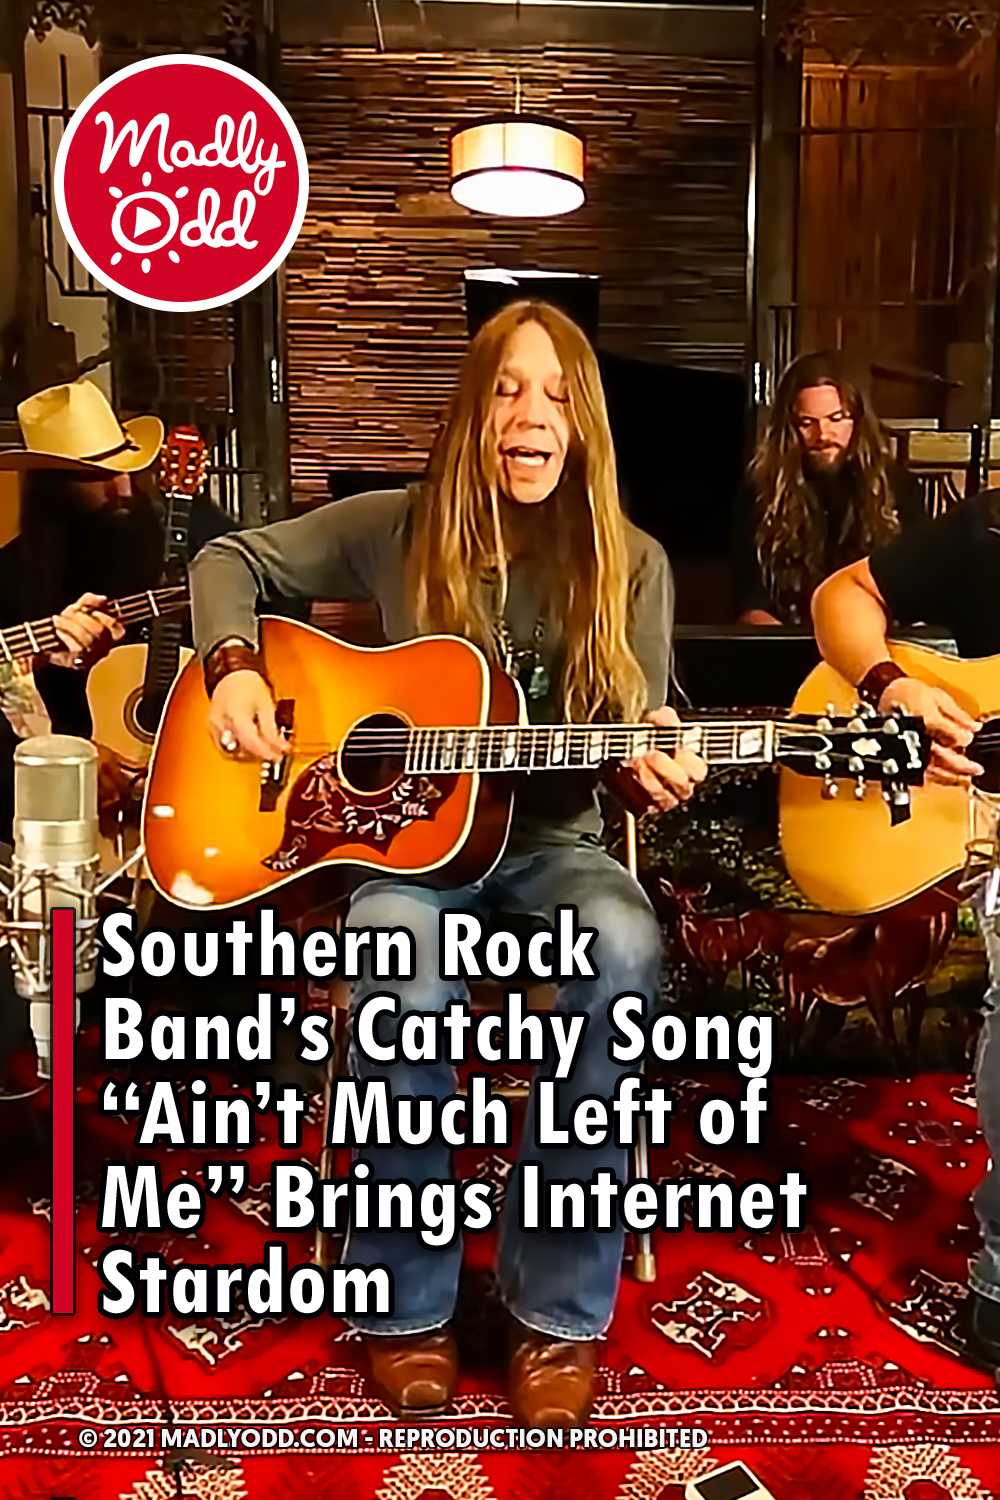 Southern Rock Band’s Catchy Song “Ain’t Much Left of Me” Brings Internet Stardom